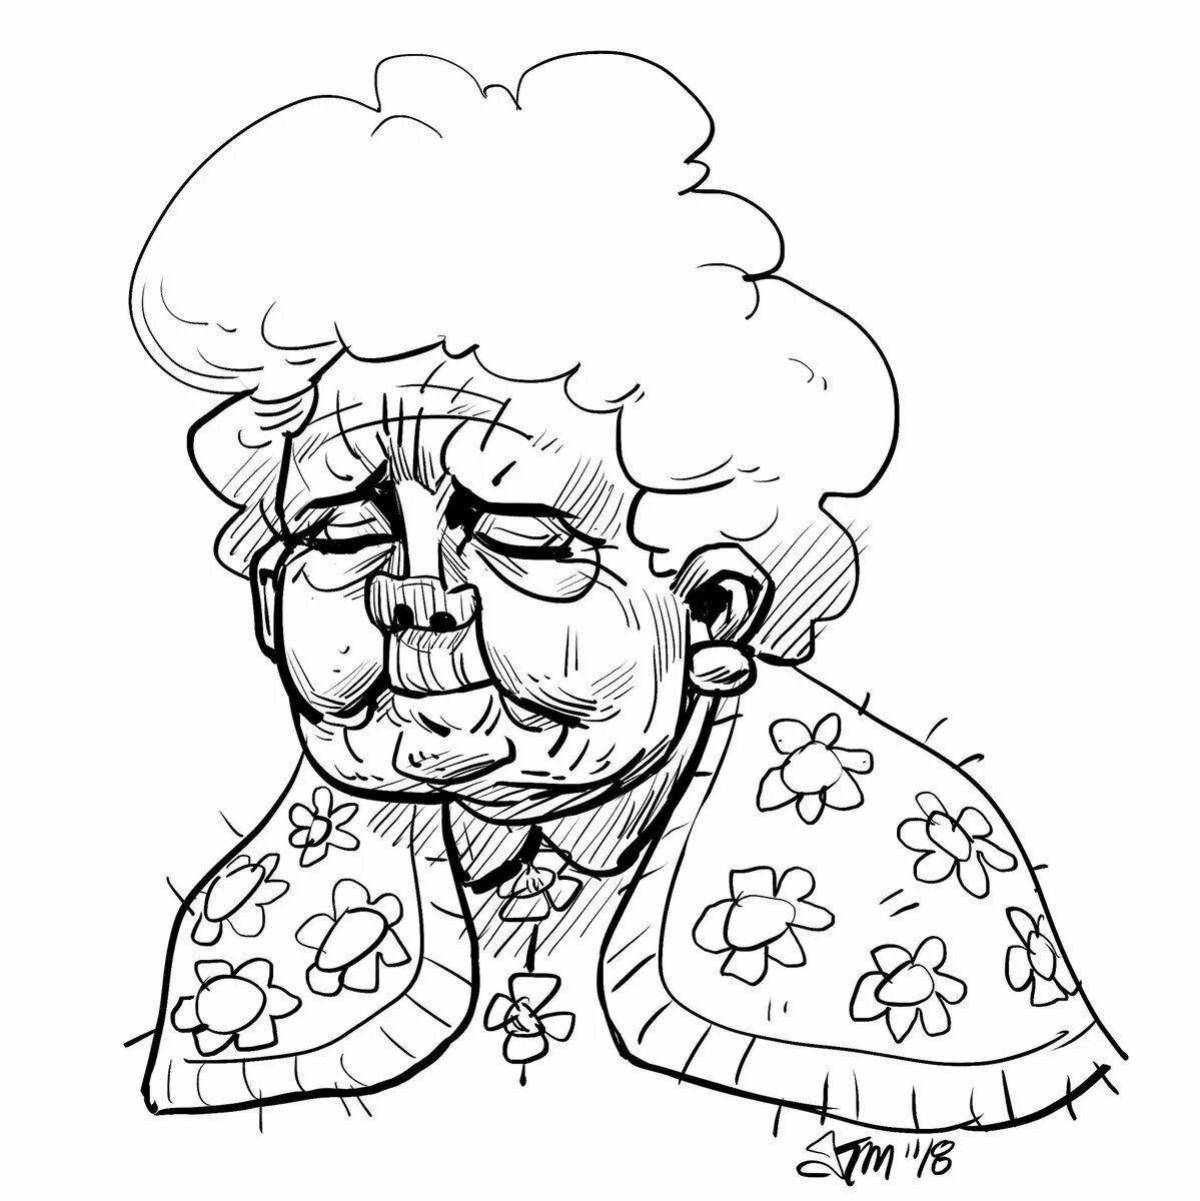 Exciting granny and grandma coloring page